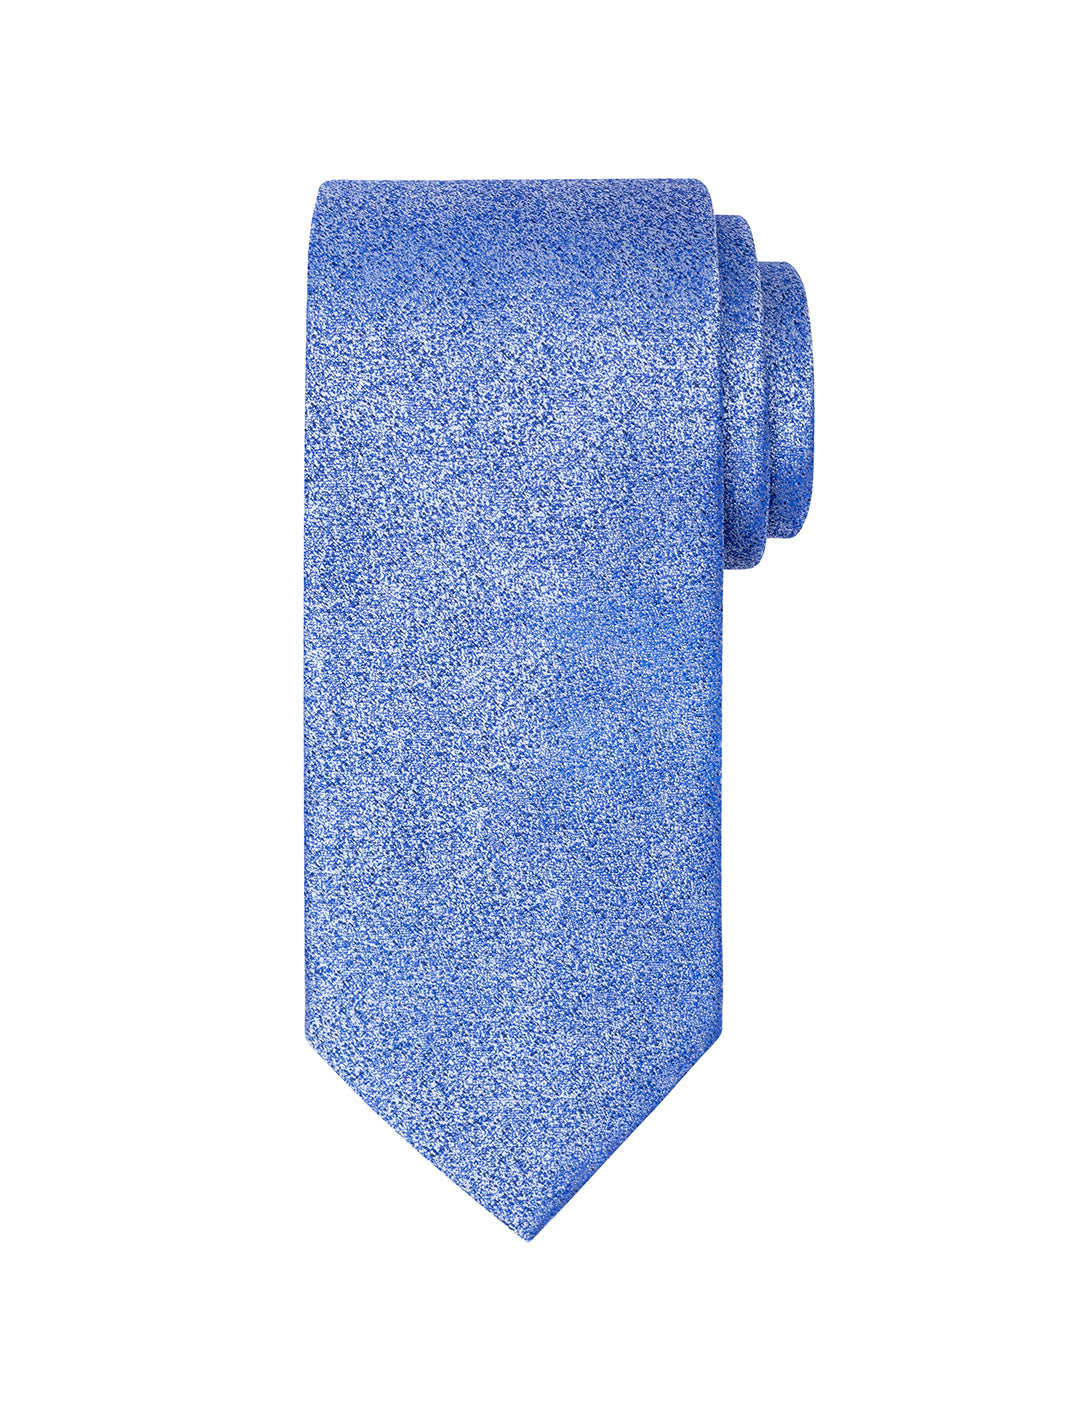 Speckle Tie in Blue